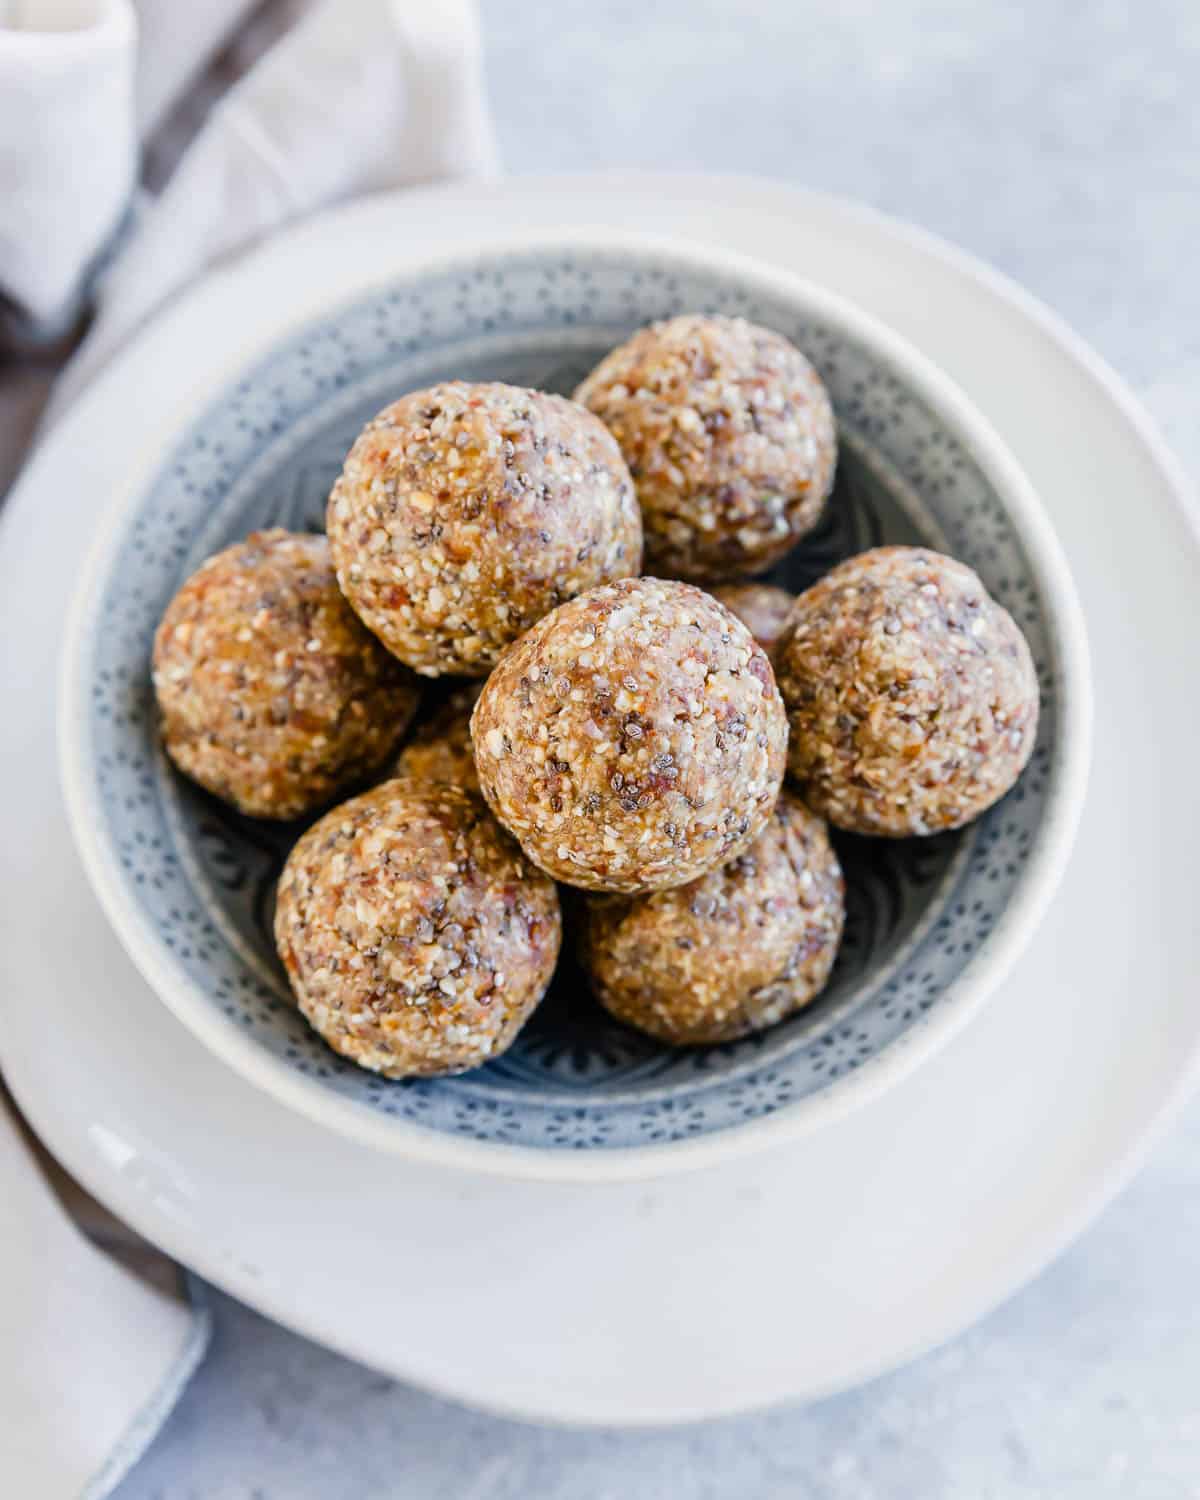 Almond date energy balls in a bowl.